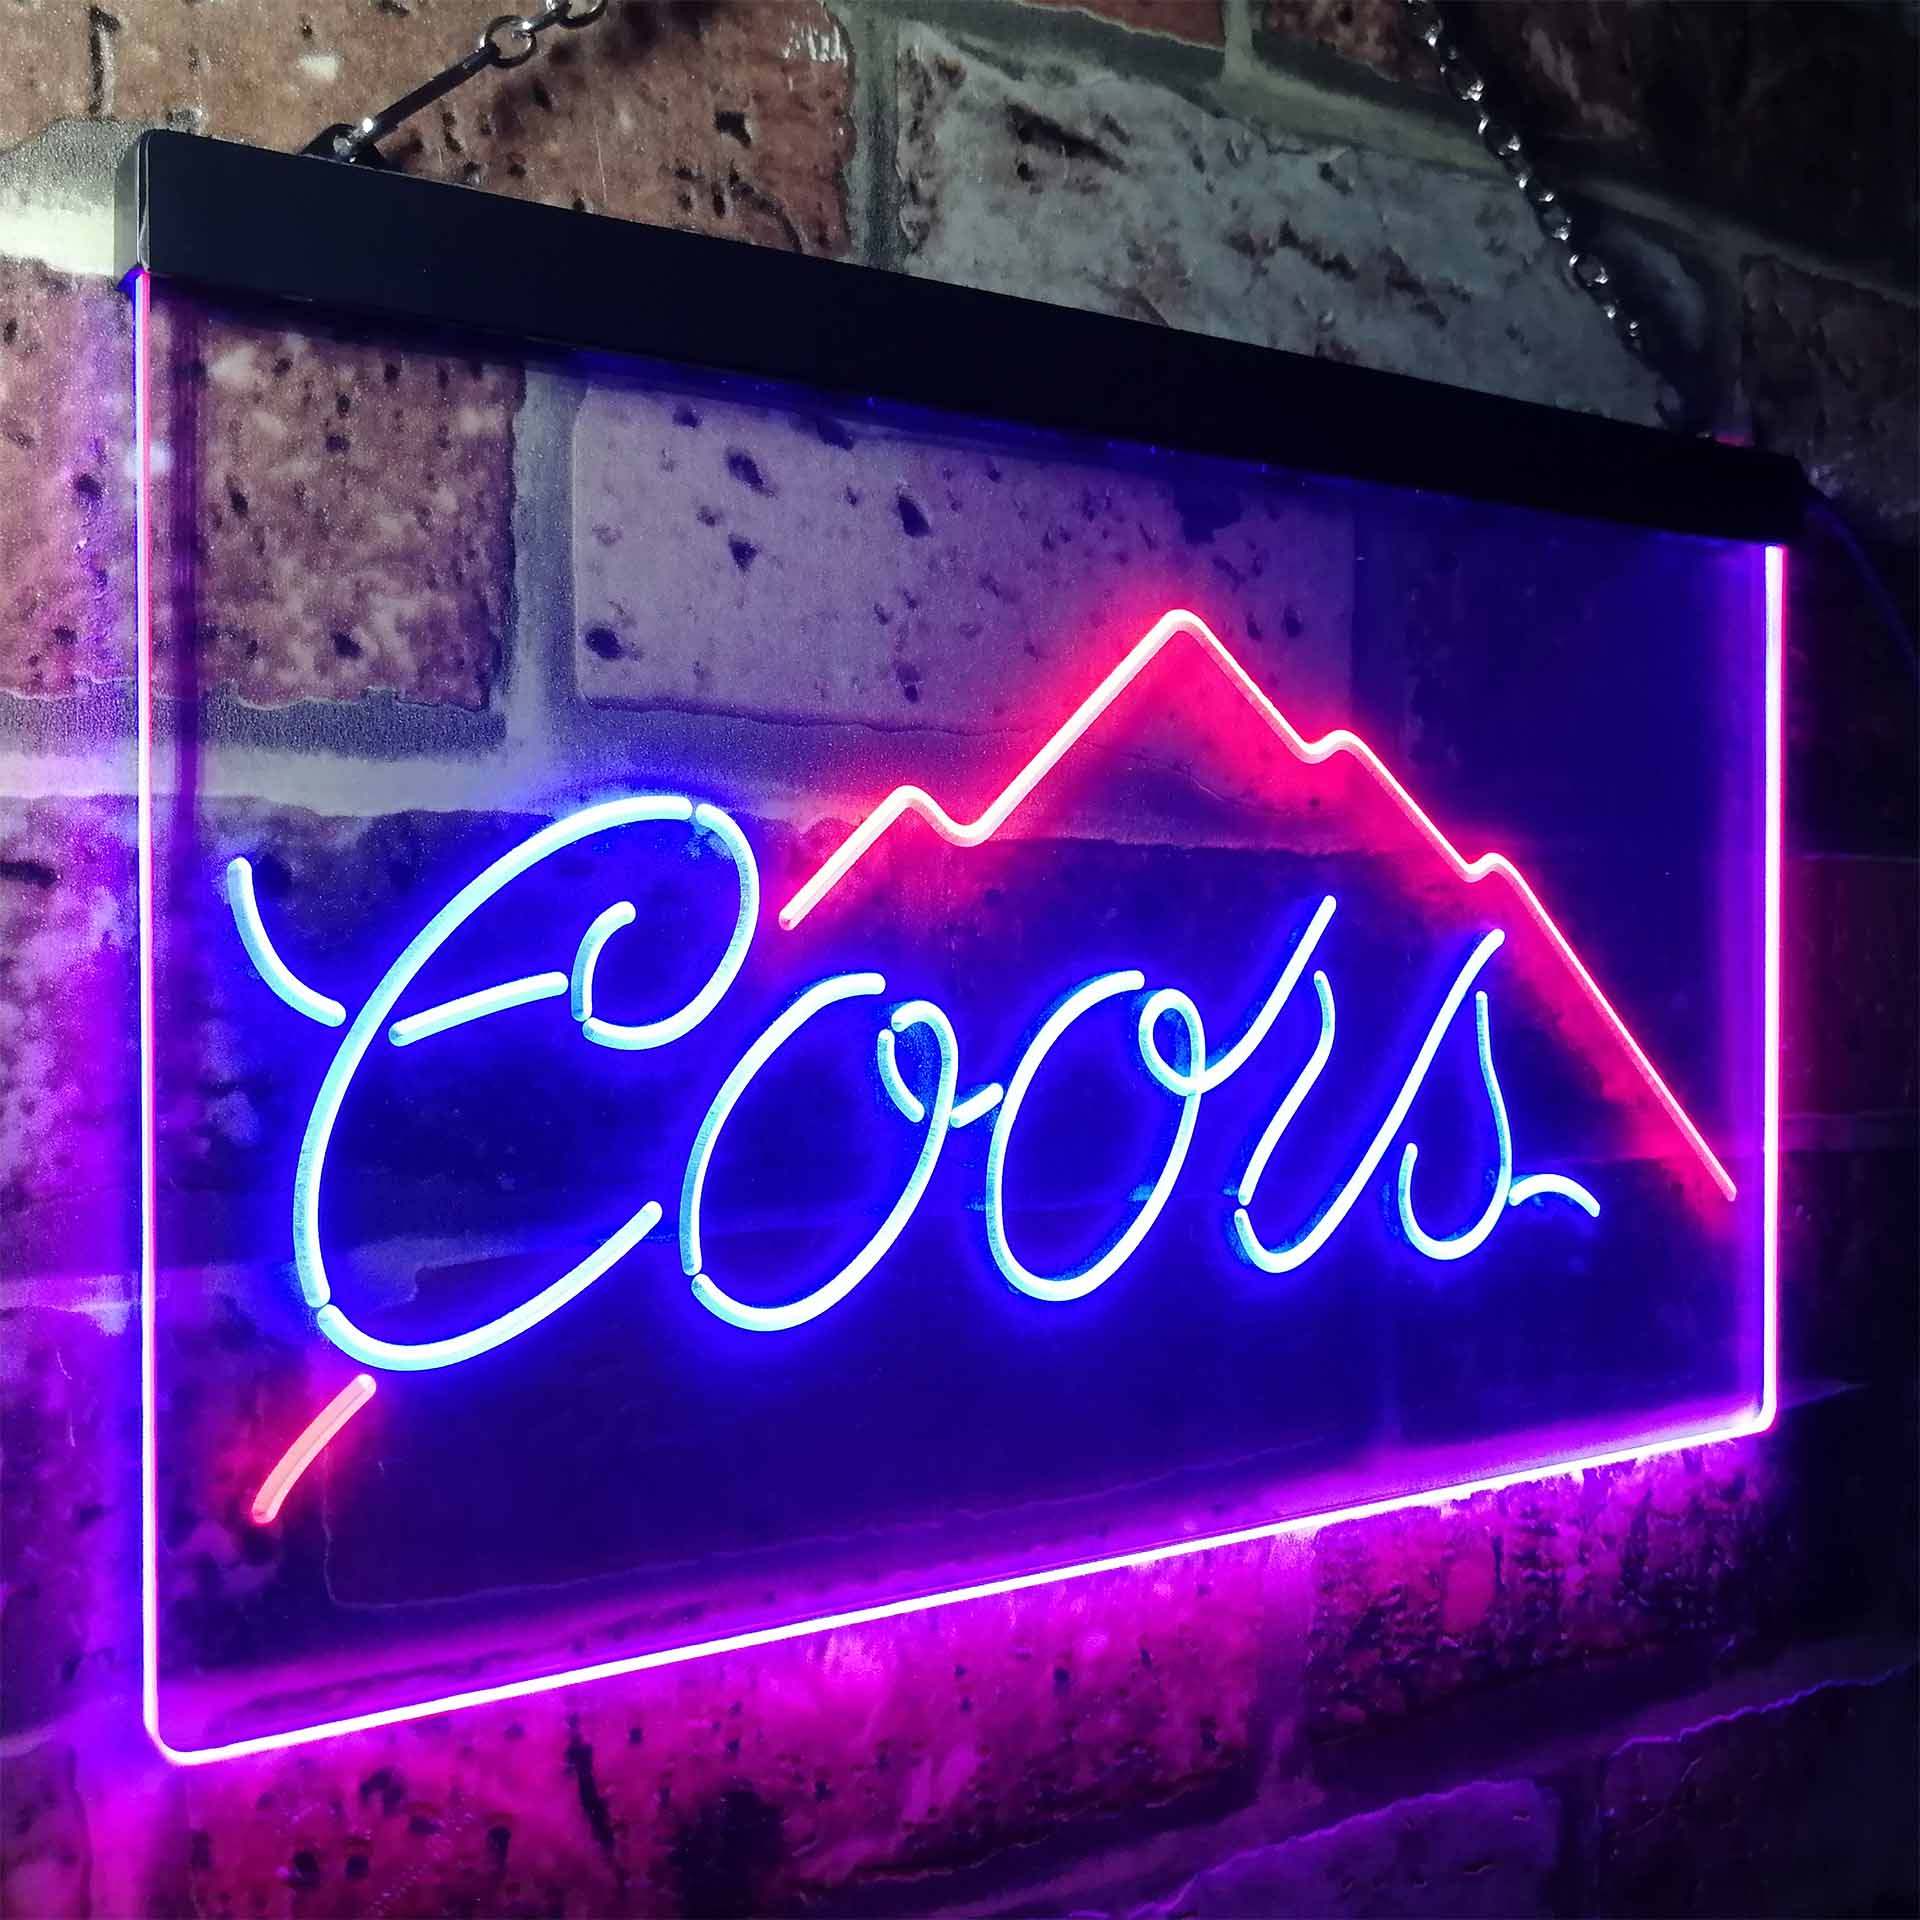 Coors Mountain Beer Neon-Like LED Sign